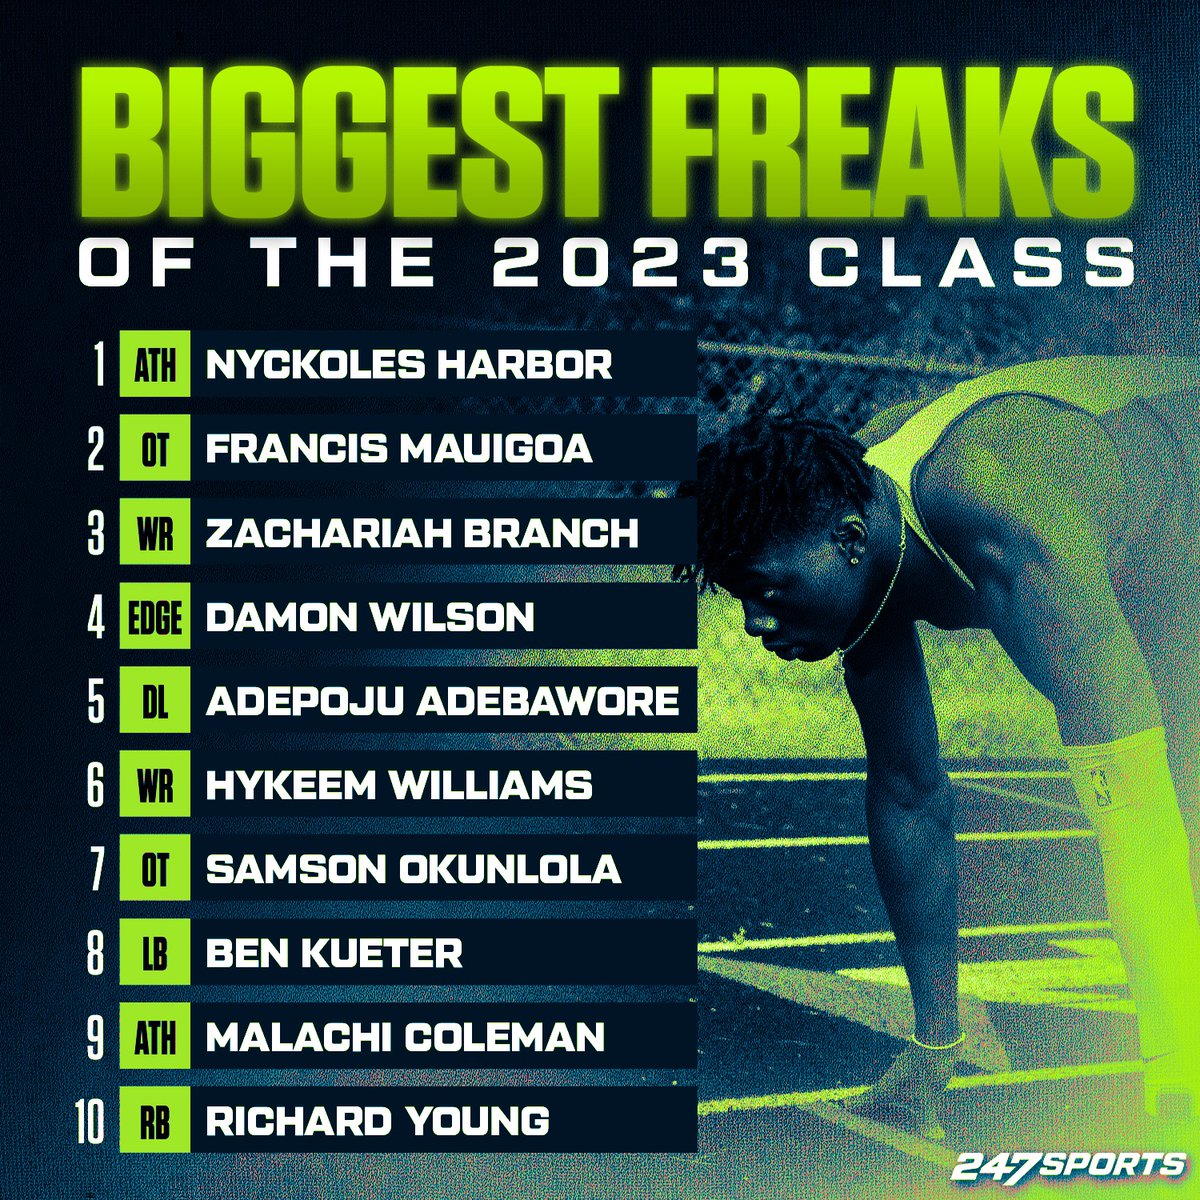 The Top 10 of @Andrew_Ivins' 2023 Freaks List 👀 5⭐️ ATH Nyckoles Harbor takes the No. 1⃣ spot. ✍️ 247sports.com/LongFormArticl…